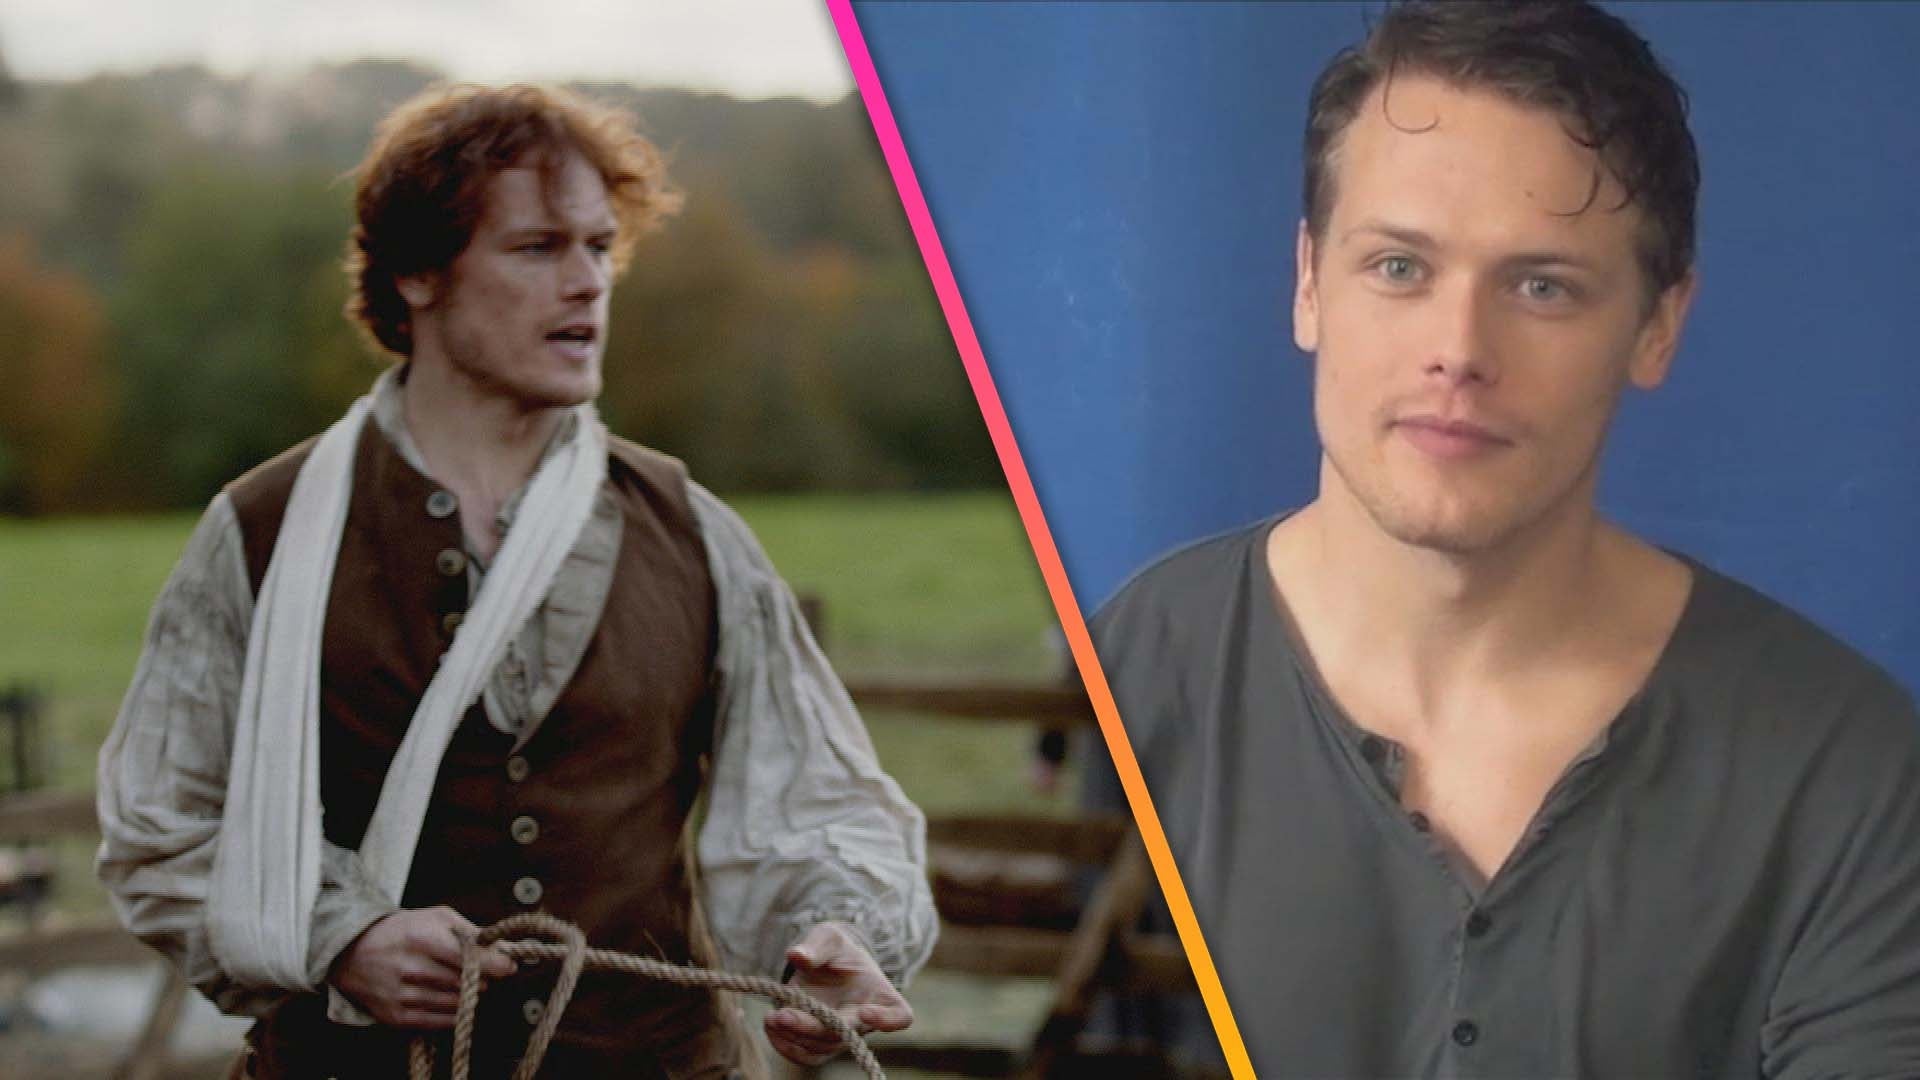 See 'Outlander' Star Sam Heughan's Audition Tape (Exclusive)